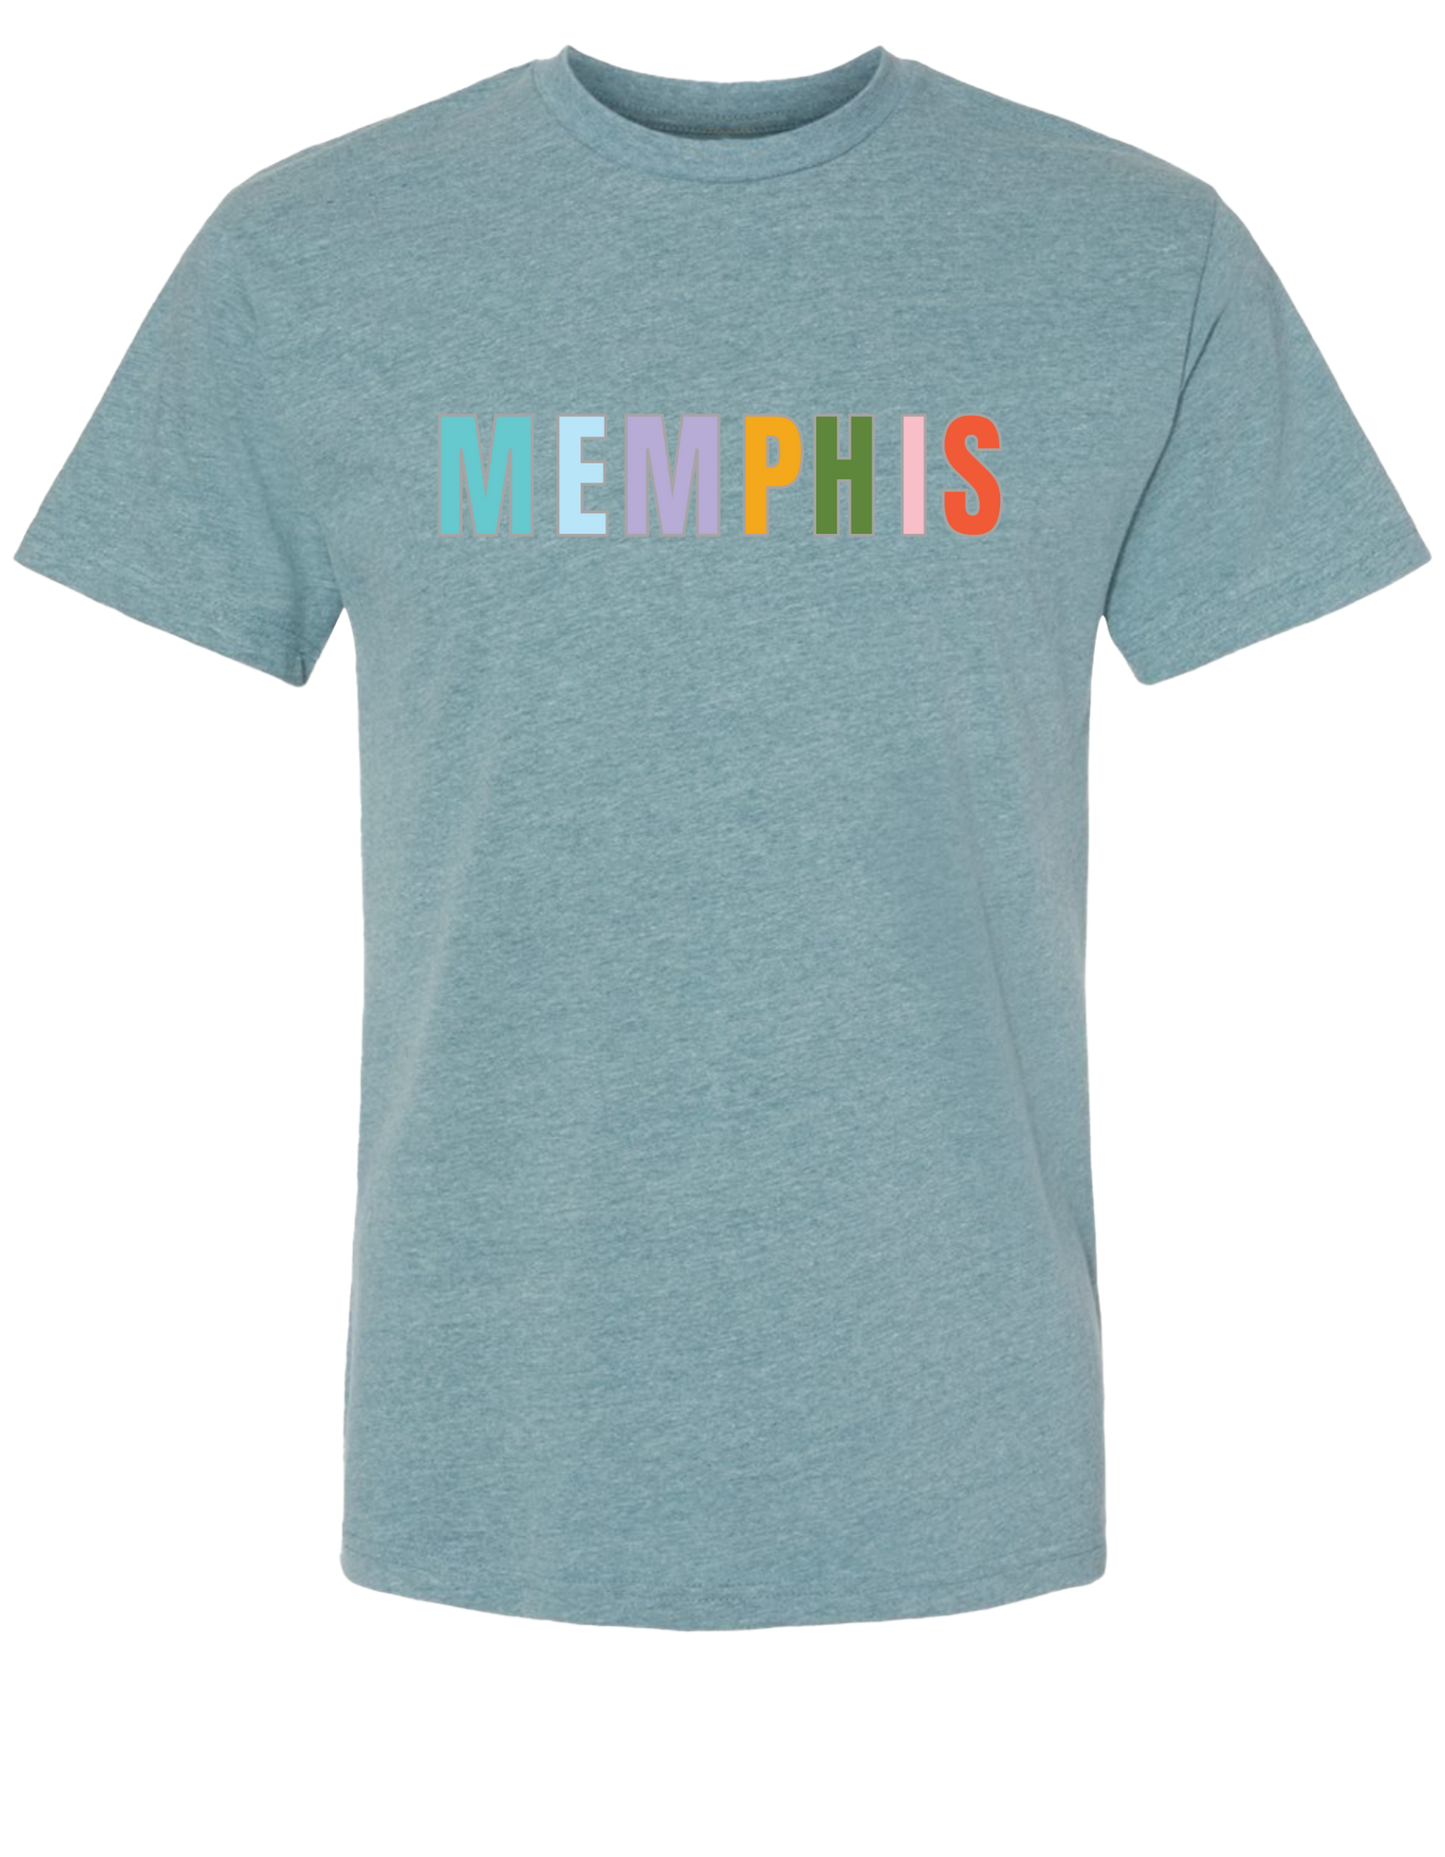 All Memphis T-Shirt - Heather Pacific